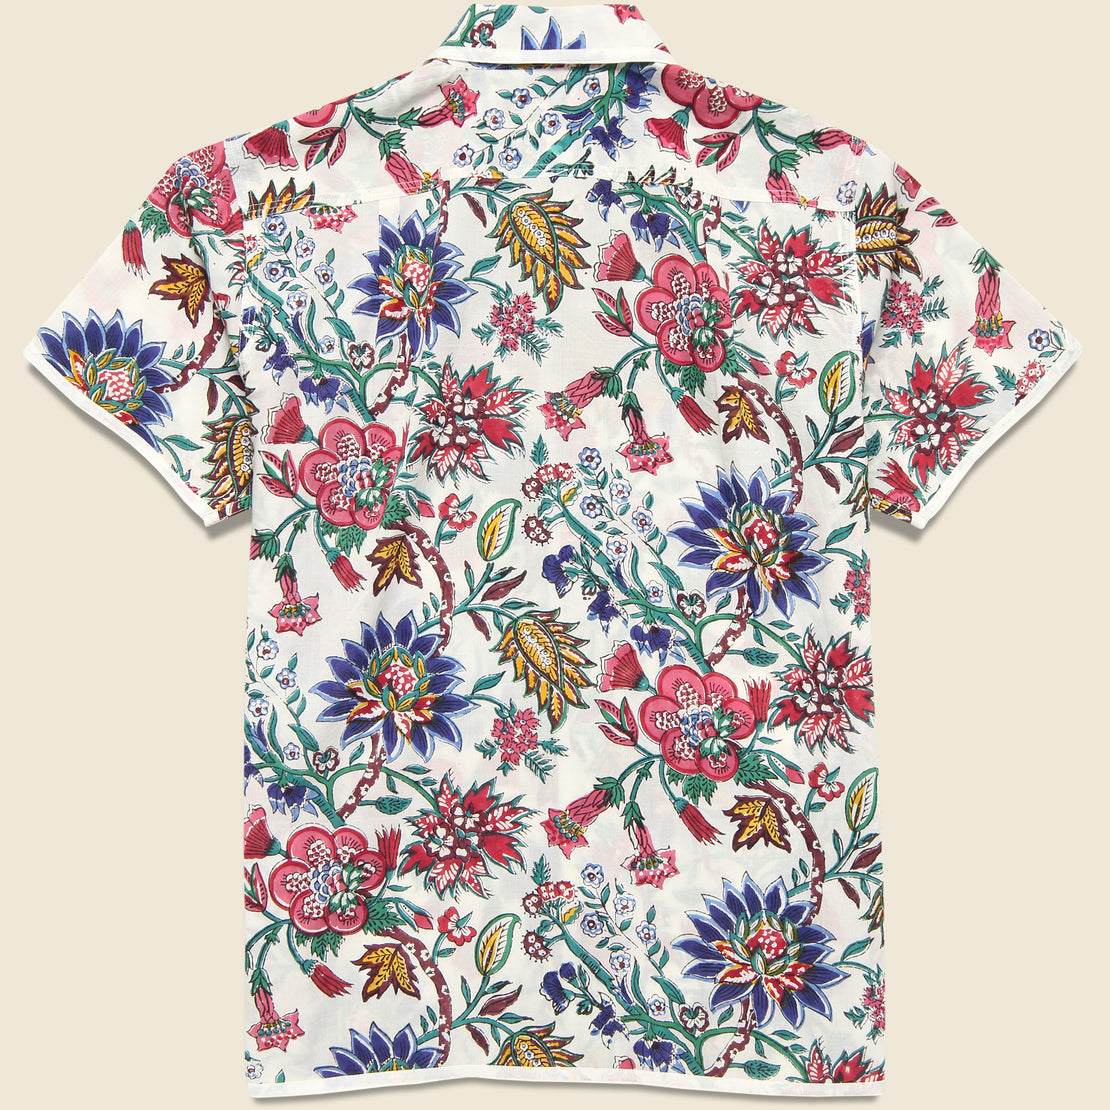 Floral Block Print Shirt - White - Kardo - STAG Provisions - Tops - S/S Woven - Floral